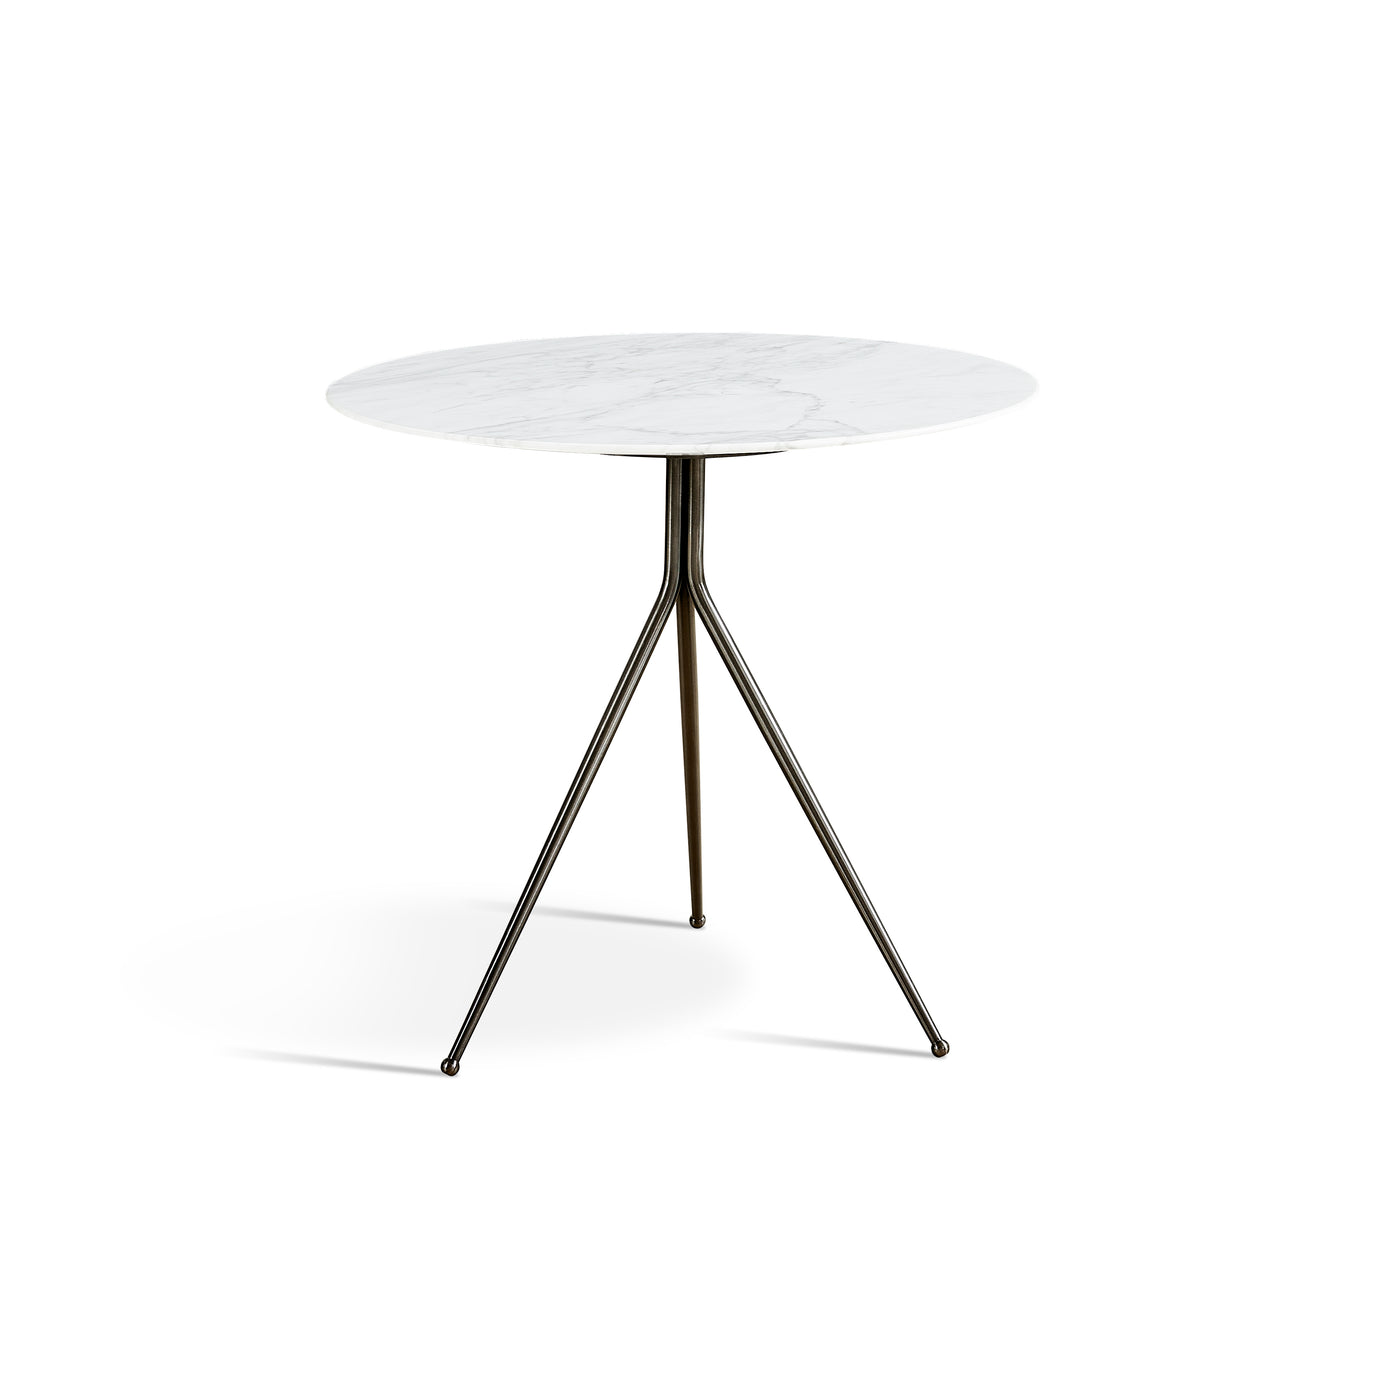 David marble side table/Small